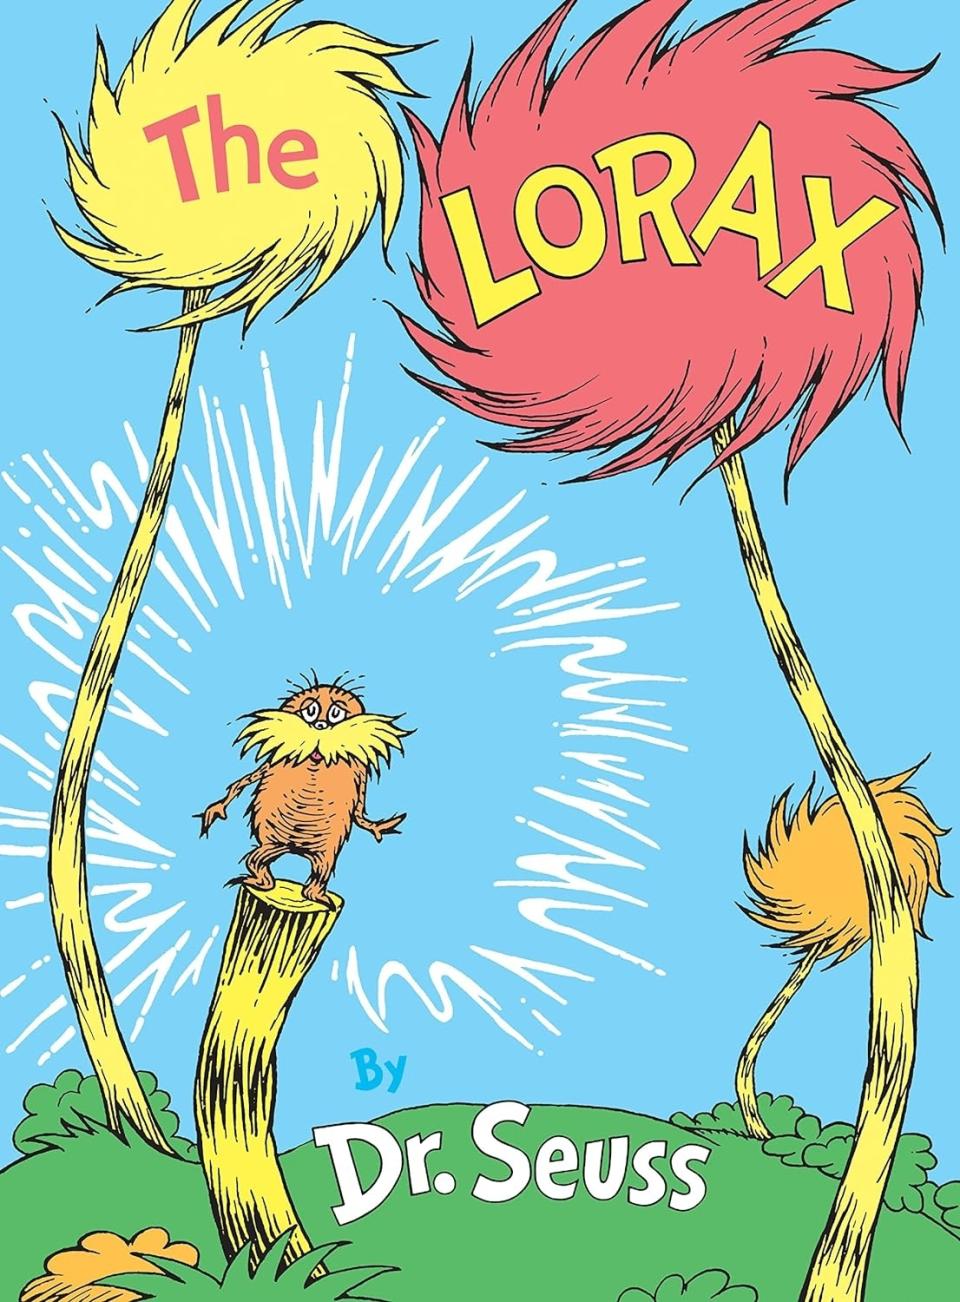 Cover of "The Lorax" by Dr. Seuss, with the Lorax standing on a stump amid truffula trees